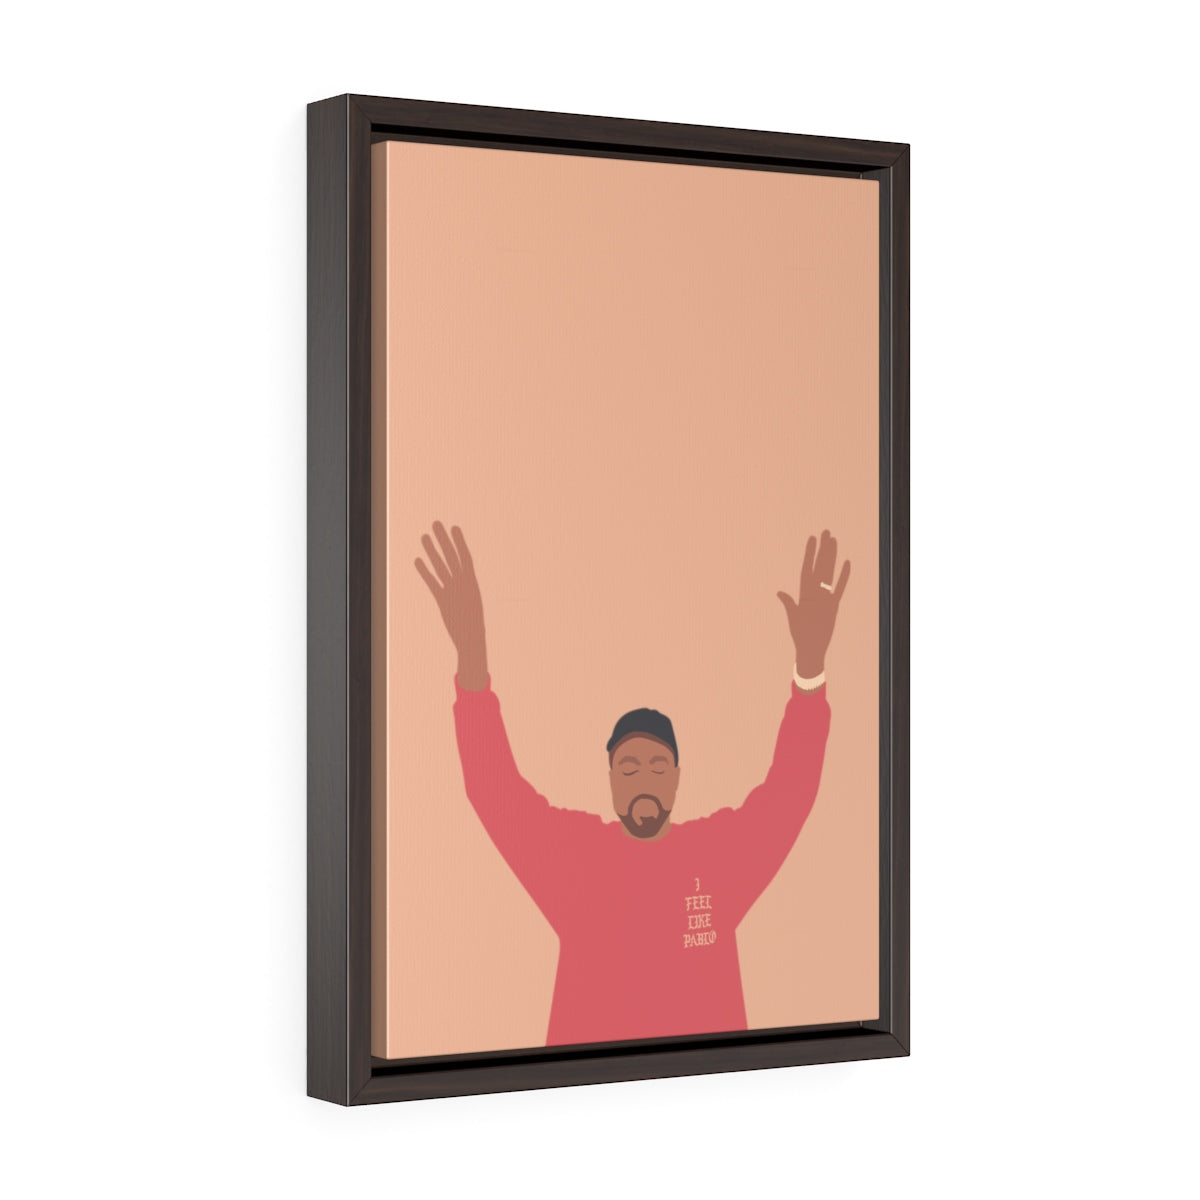 Kanye West I Feel Like Pablo Framed Premium Gallery Wrap Canvas - The Life of Pablo TLOP tour merch inspired-12″ × 18″-Premium Gallery Wraps (1.25″)-Walnut-Archethype